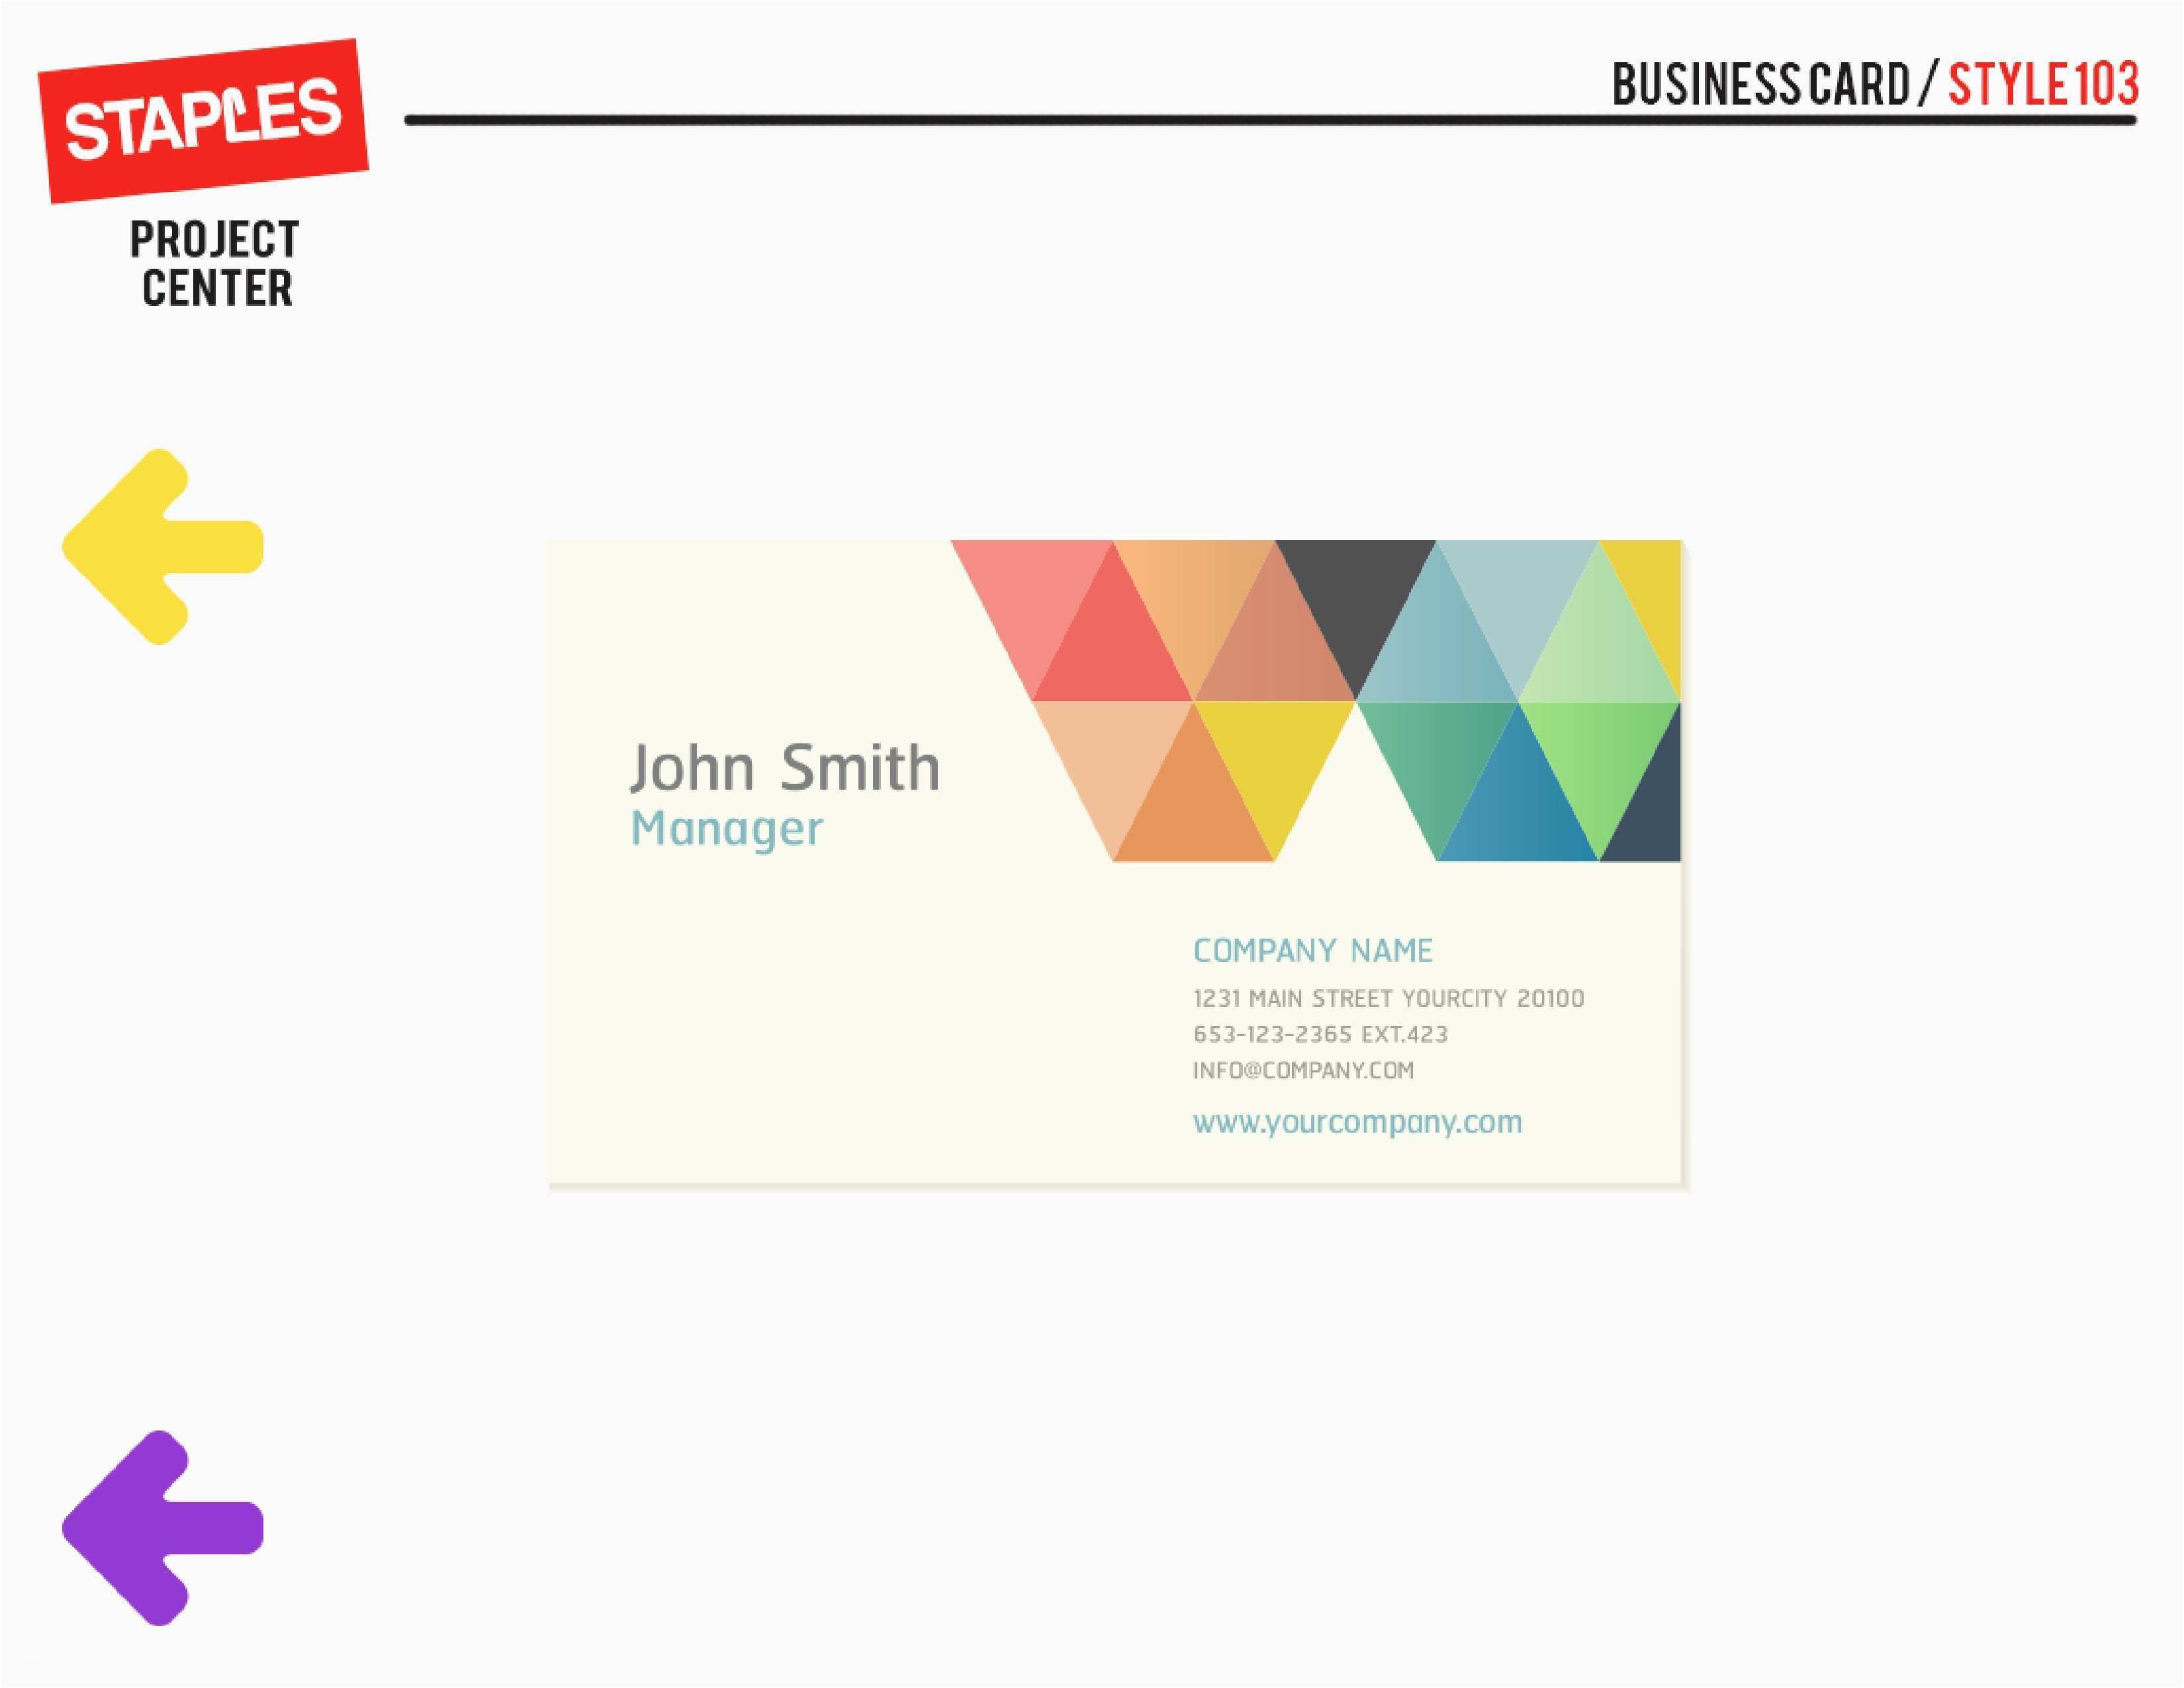 52 Customize Our Free Avery Business Card Template Staples Download with Avery Business Card Template Staples